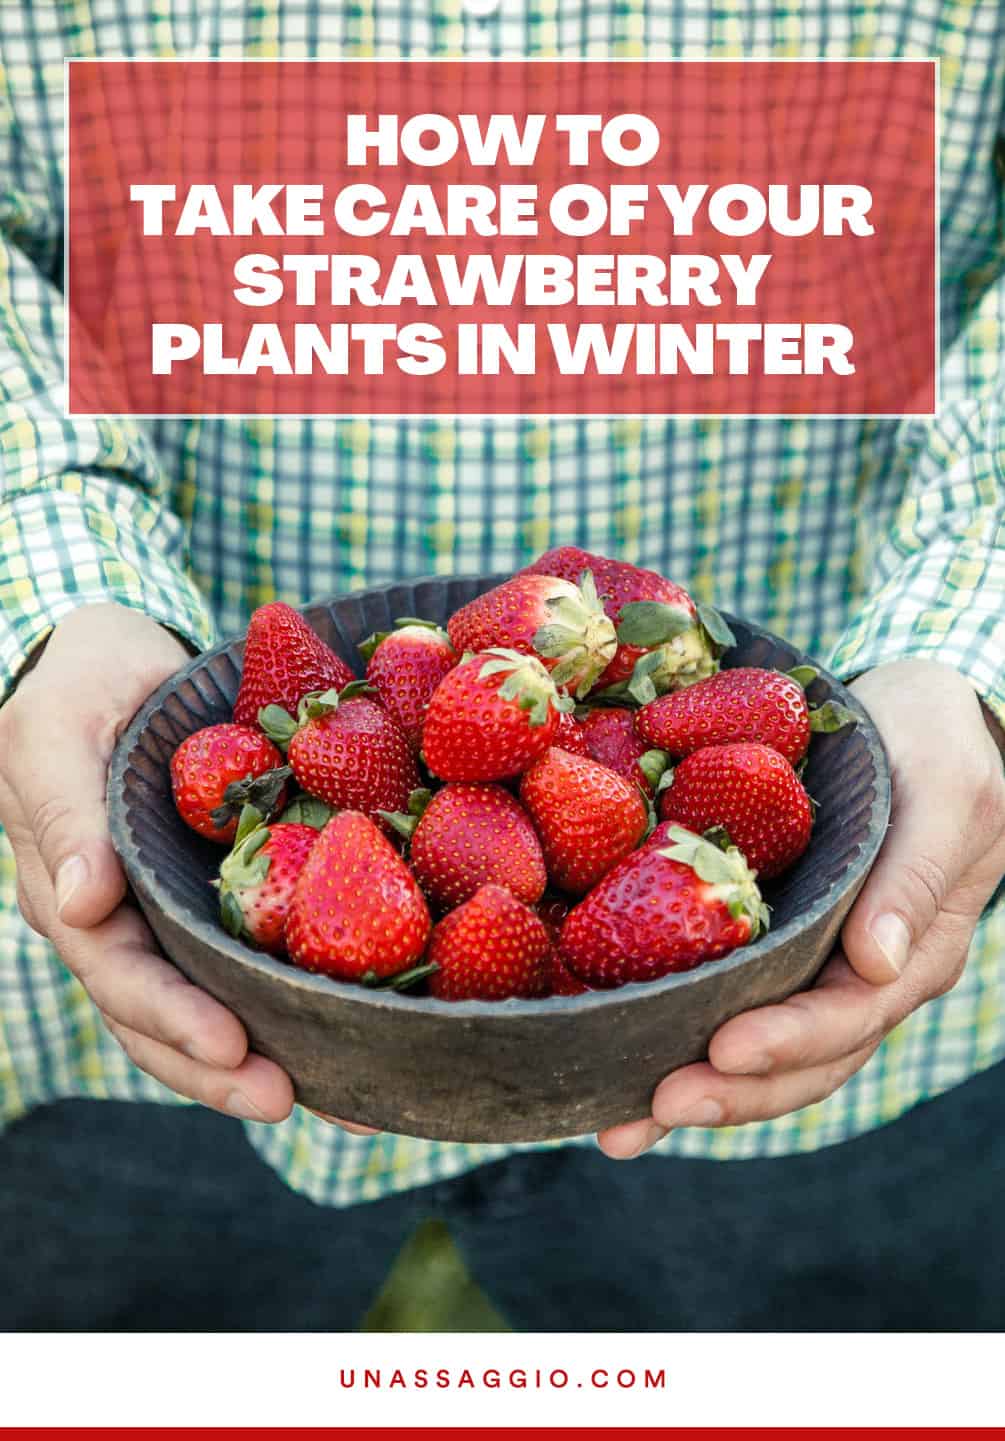 How to maintain your strawberries in winter?